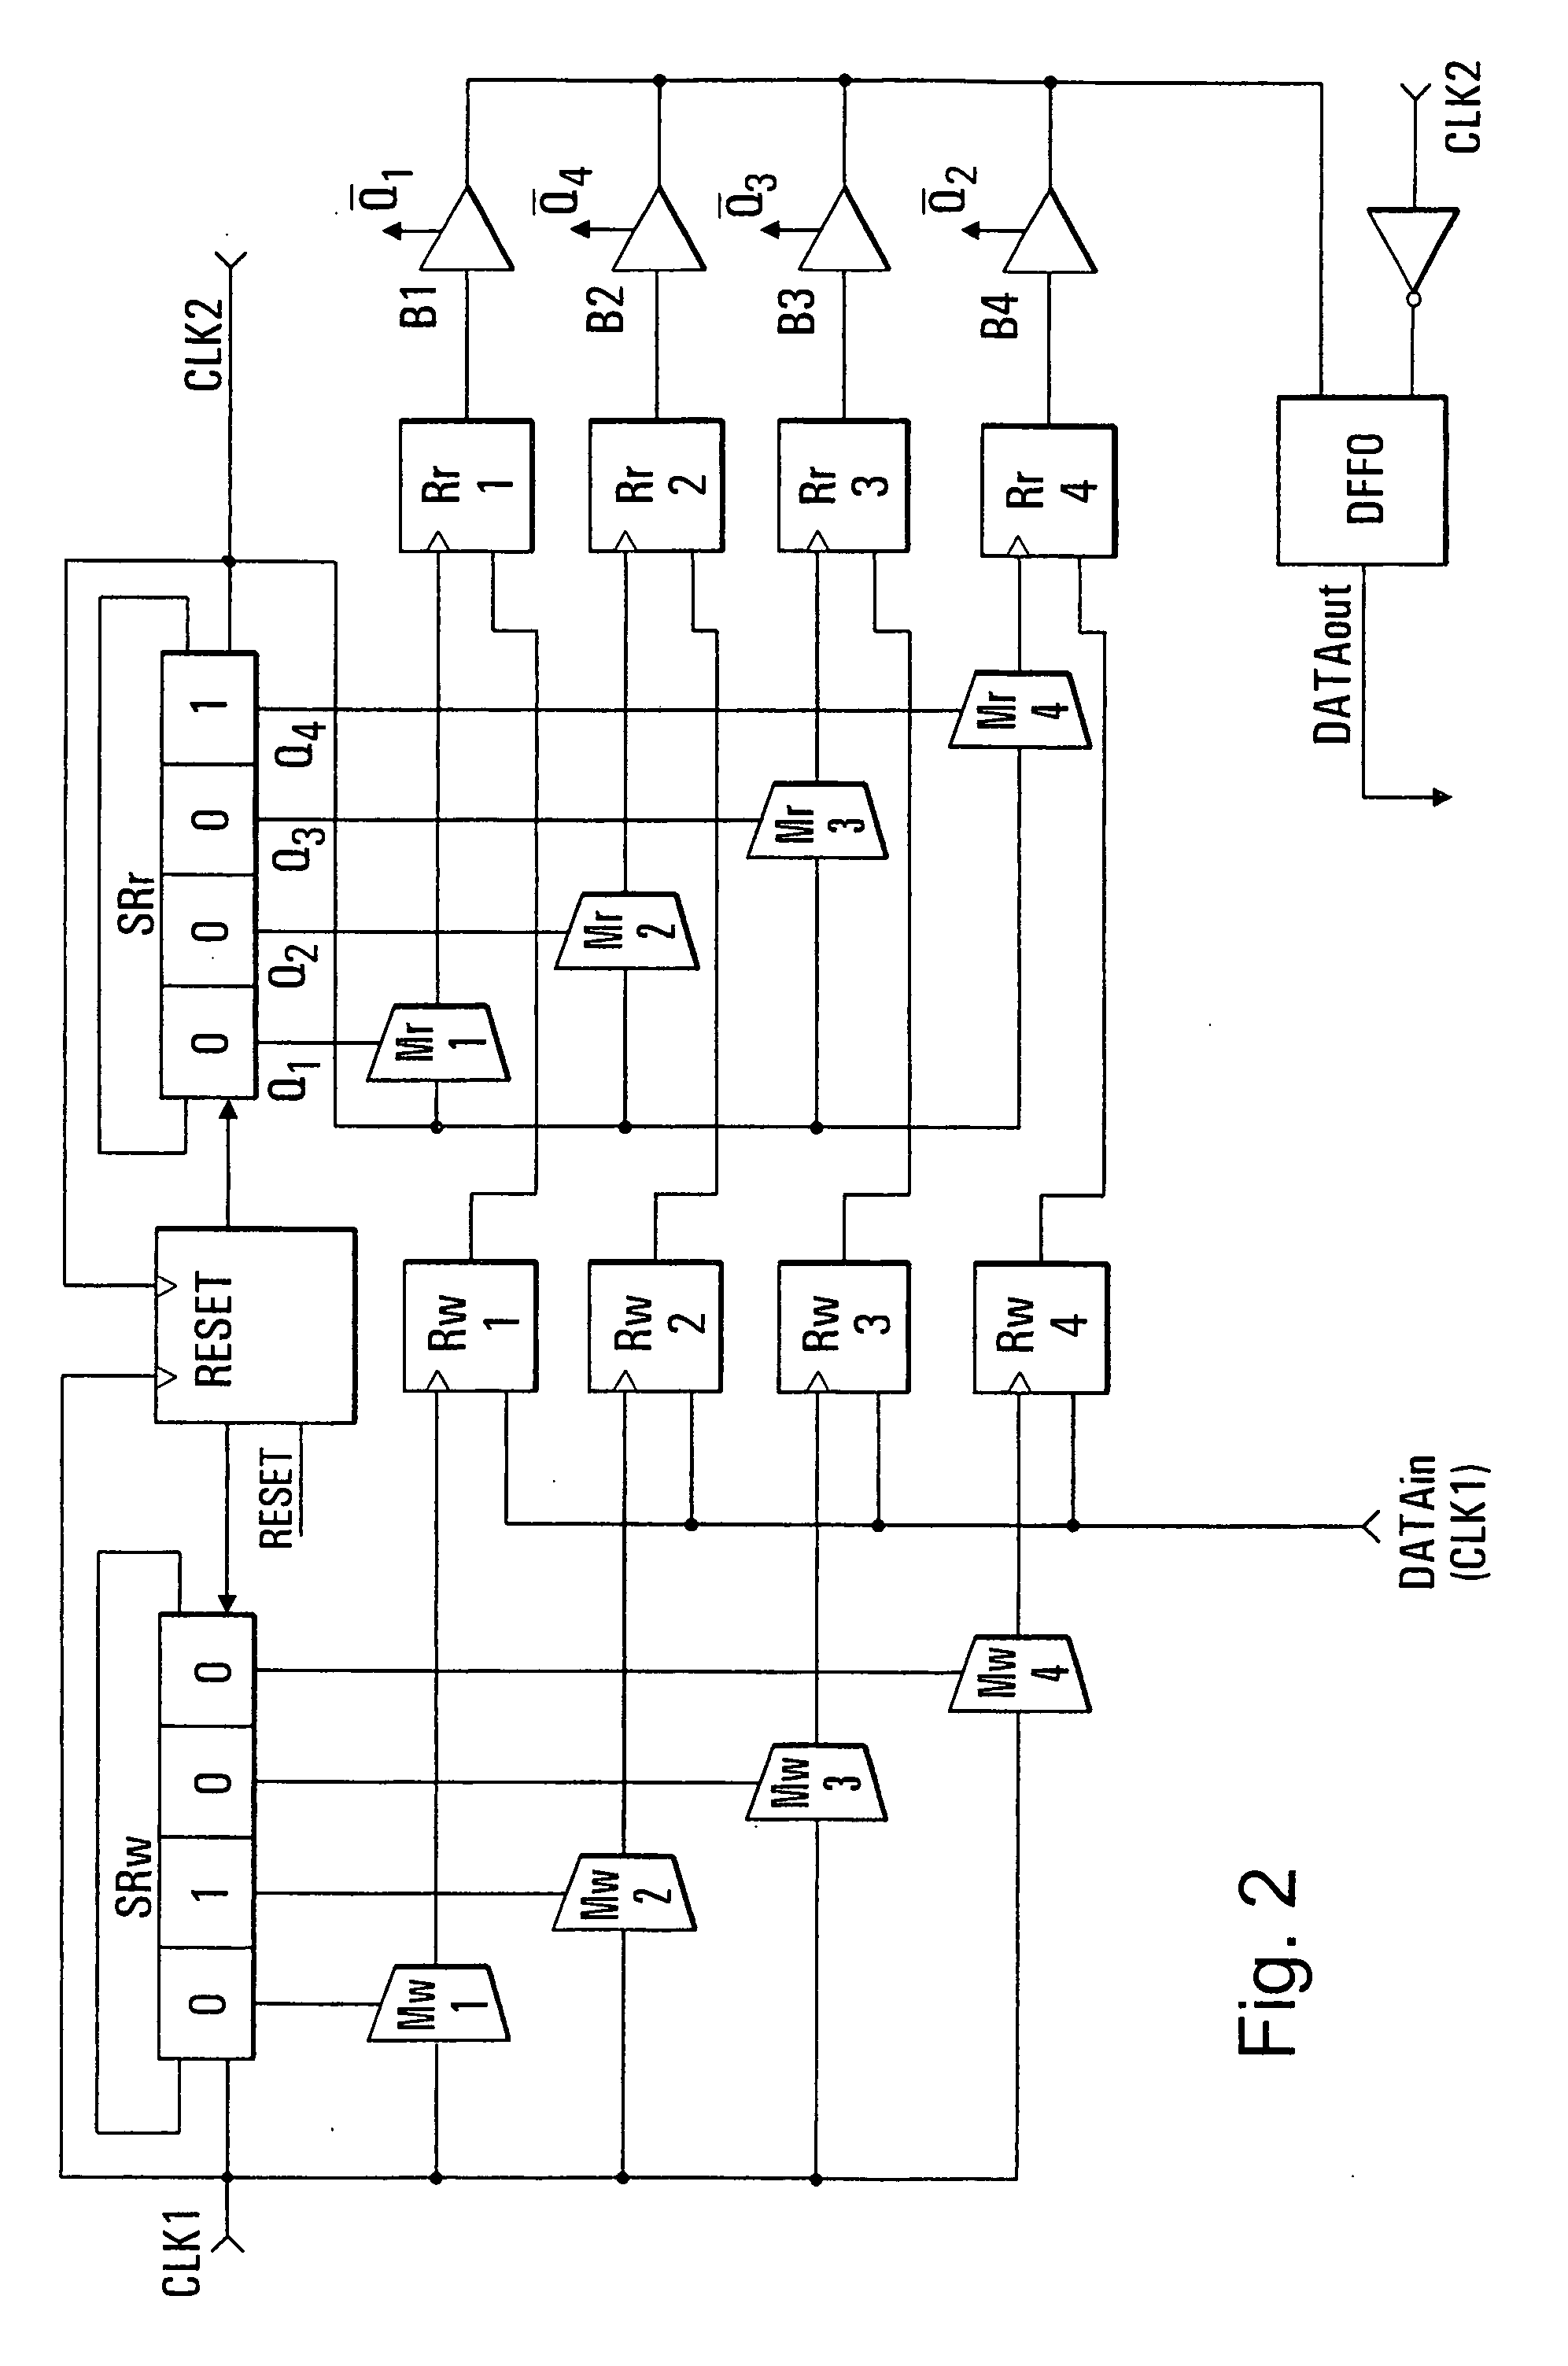 Method of recovering digital data from a clocked serial input signal and clocked data recovery circuit